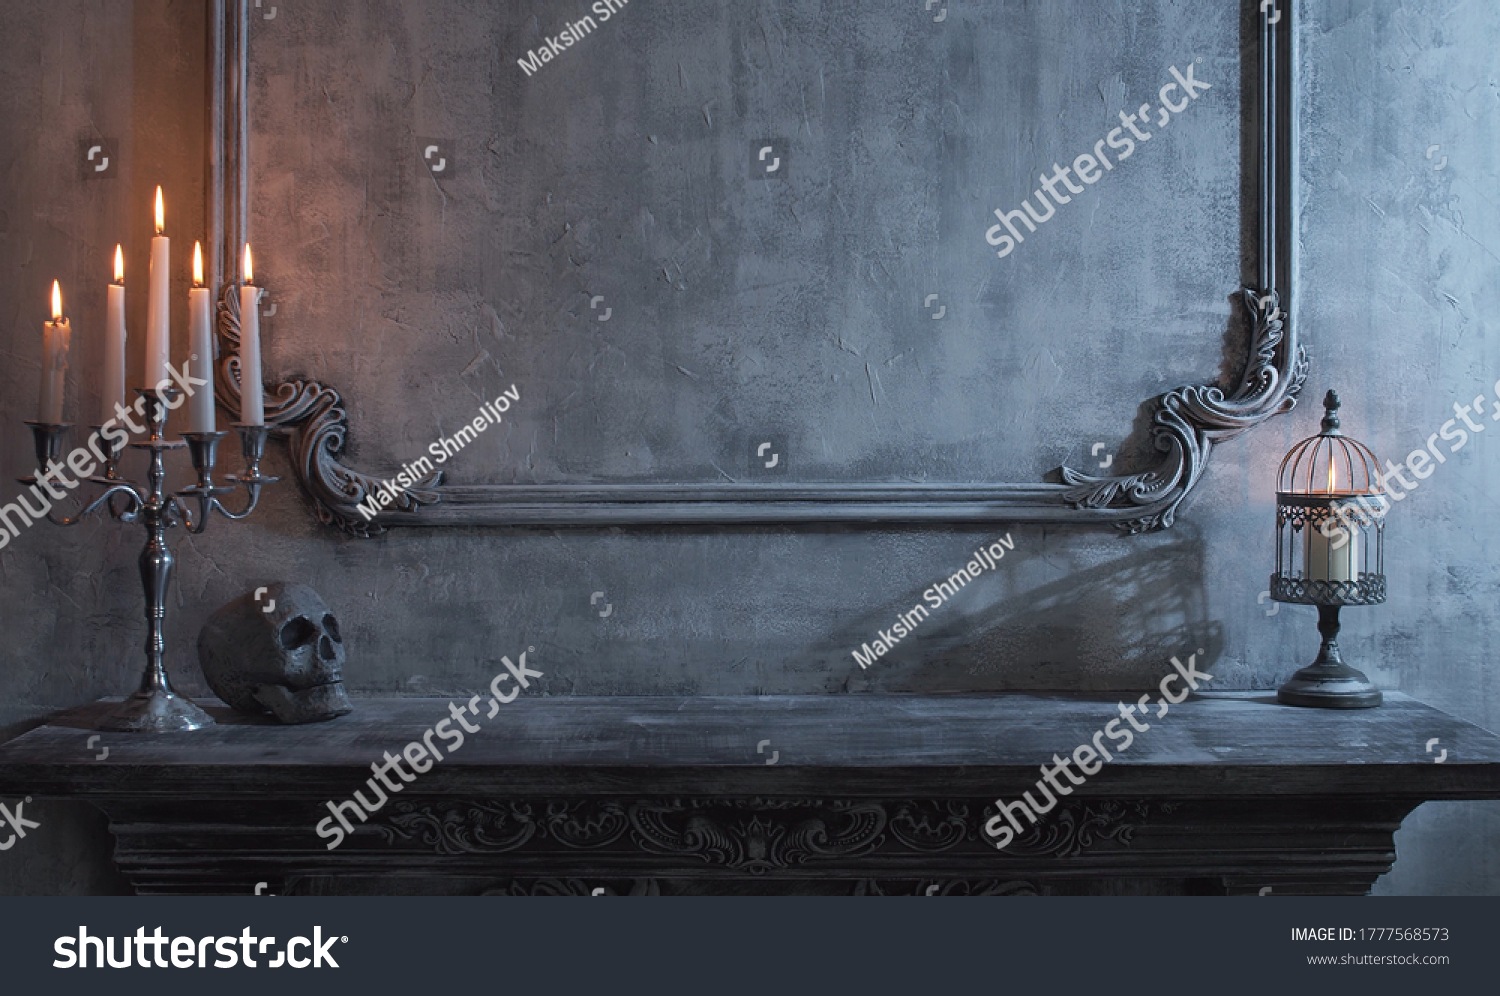 Mystical Halloween still-life background. Skull, candlestick with candles, old fireplace. Horror and witchery. #1777568573